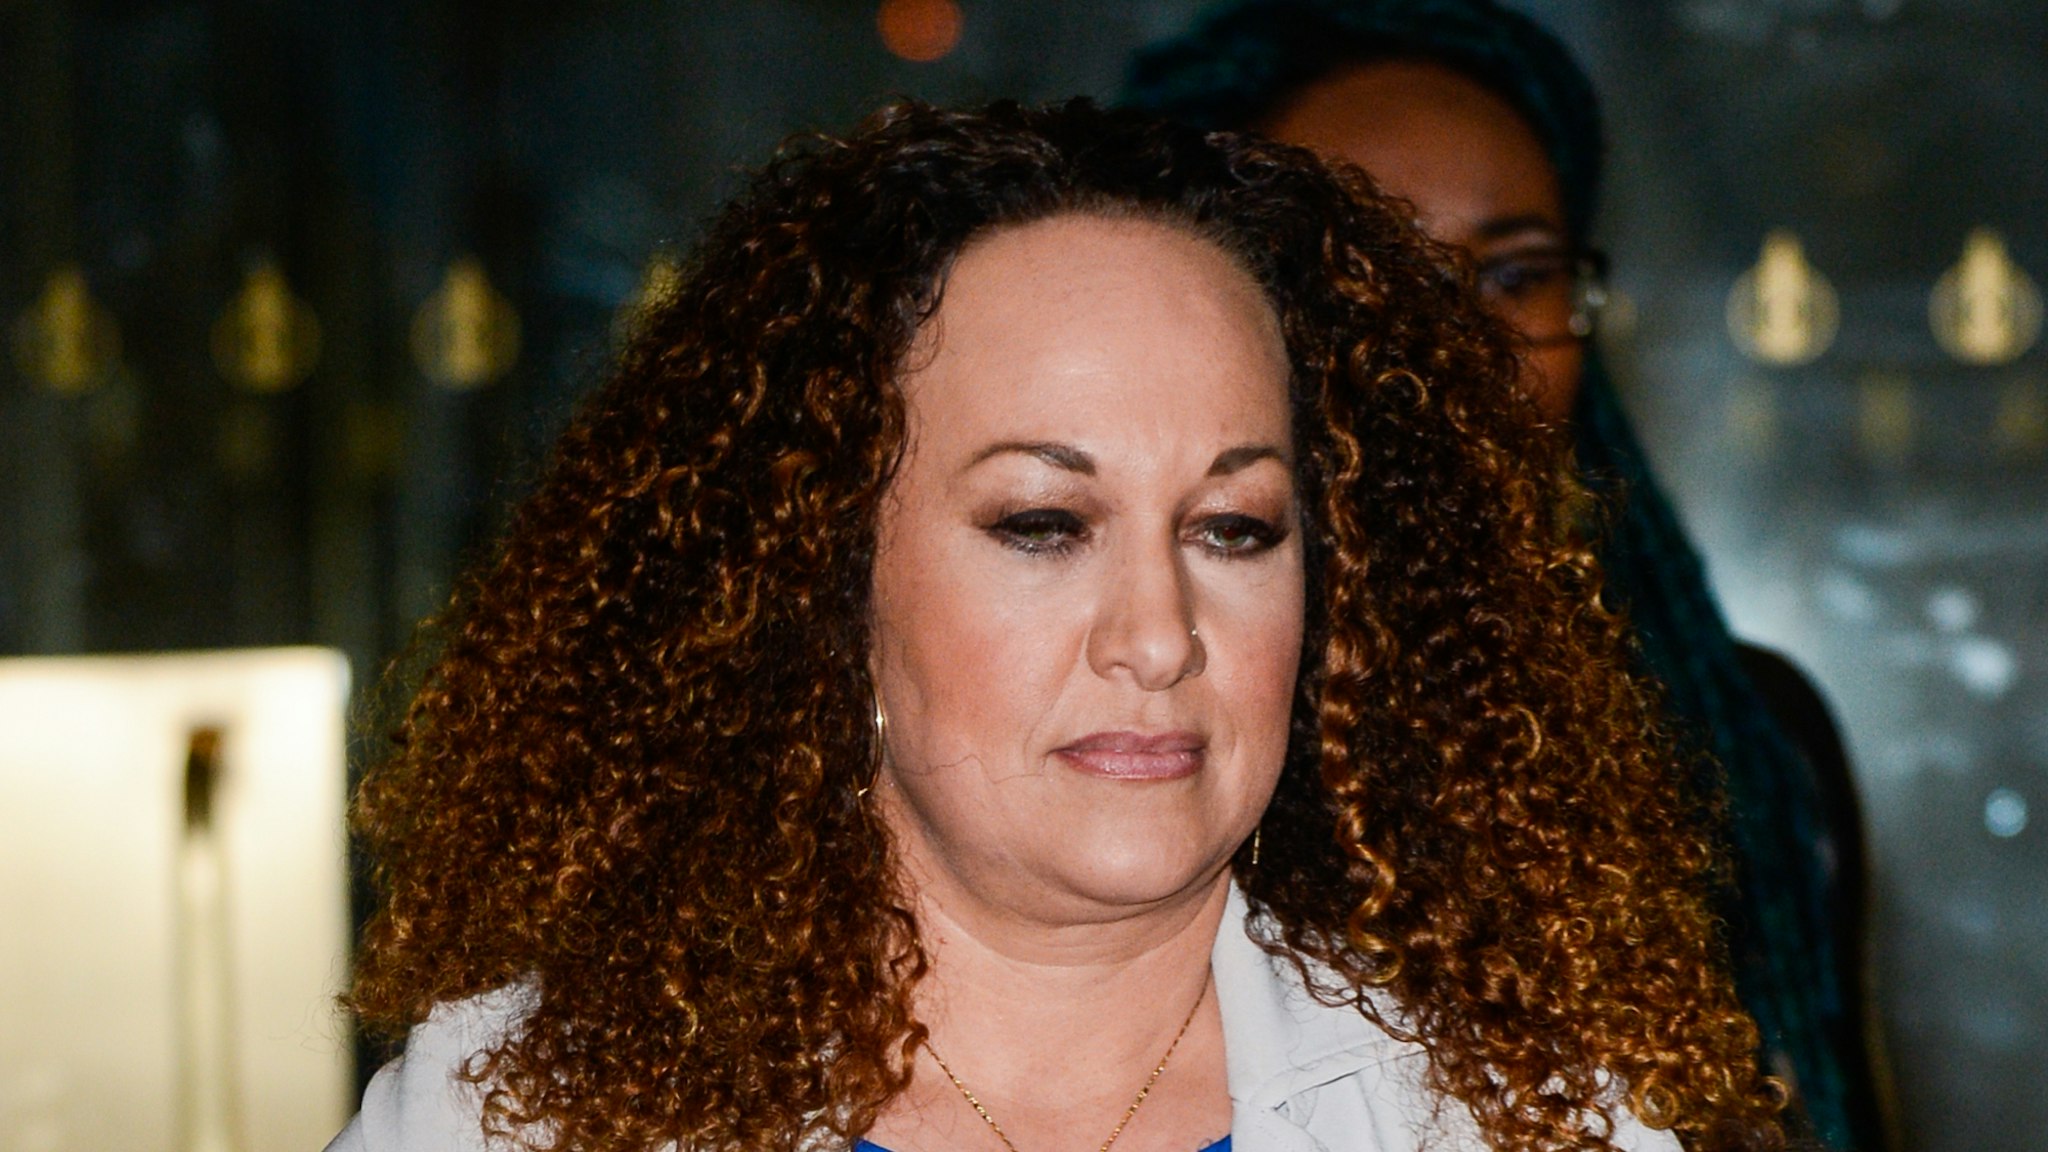 Activist Rachel Dolezal leaves the "Today Show" taping at the NBC Rockefeller Center Studios on March 27, 2017 in New York City.